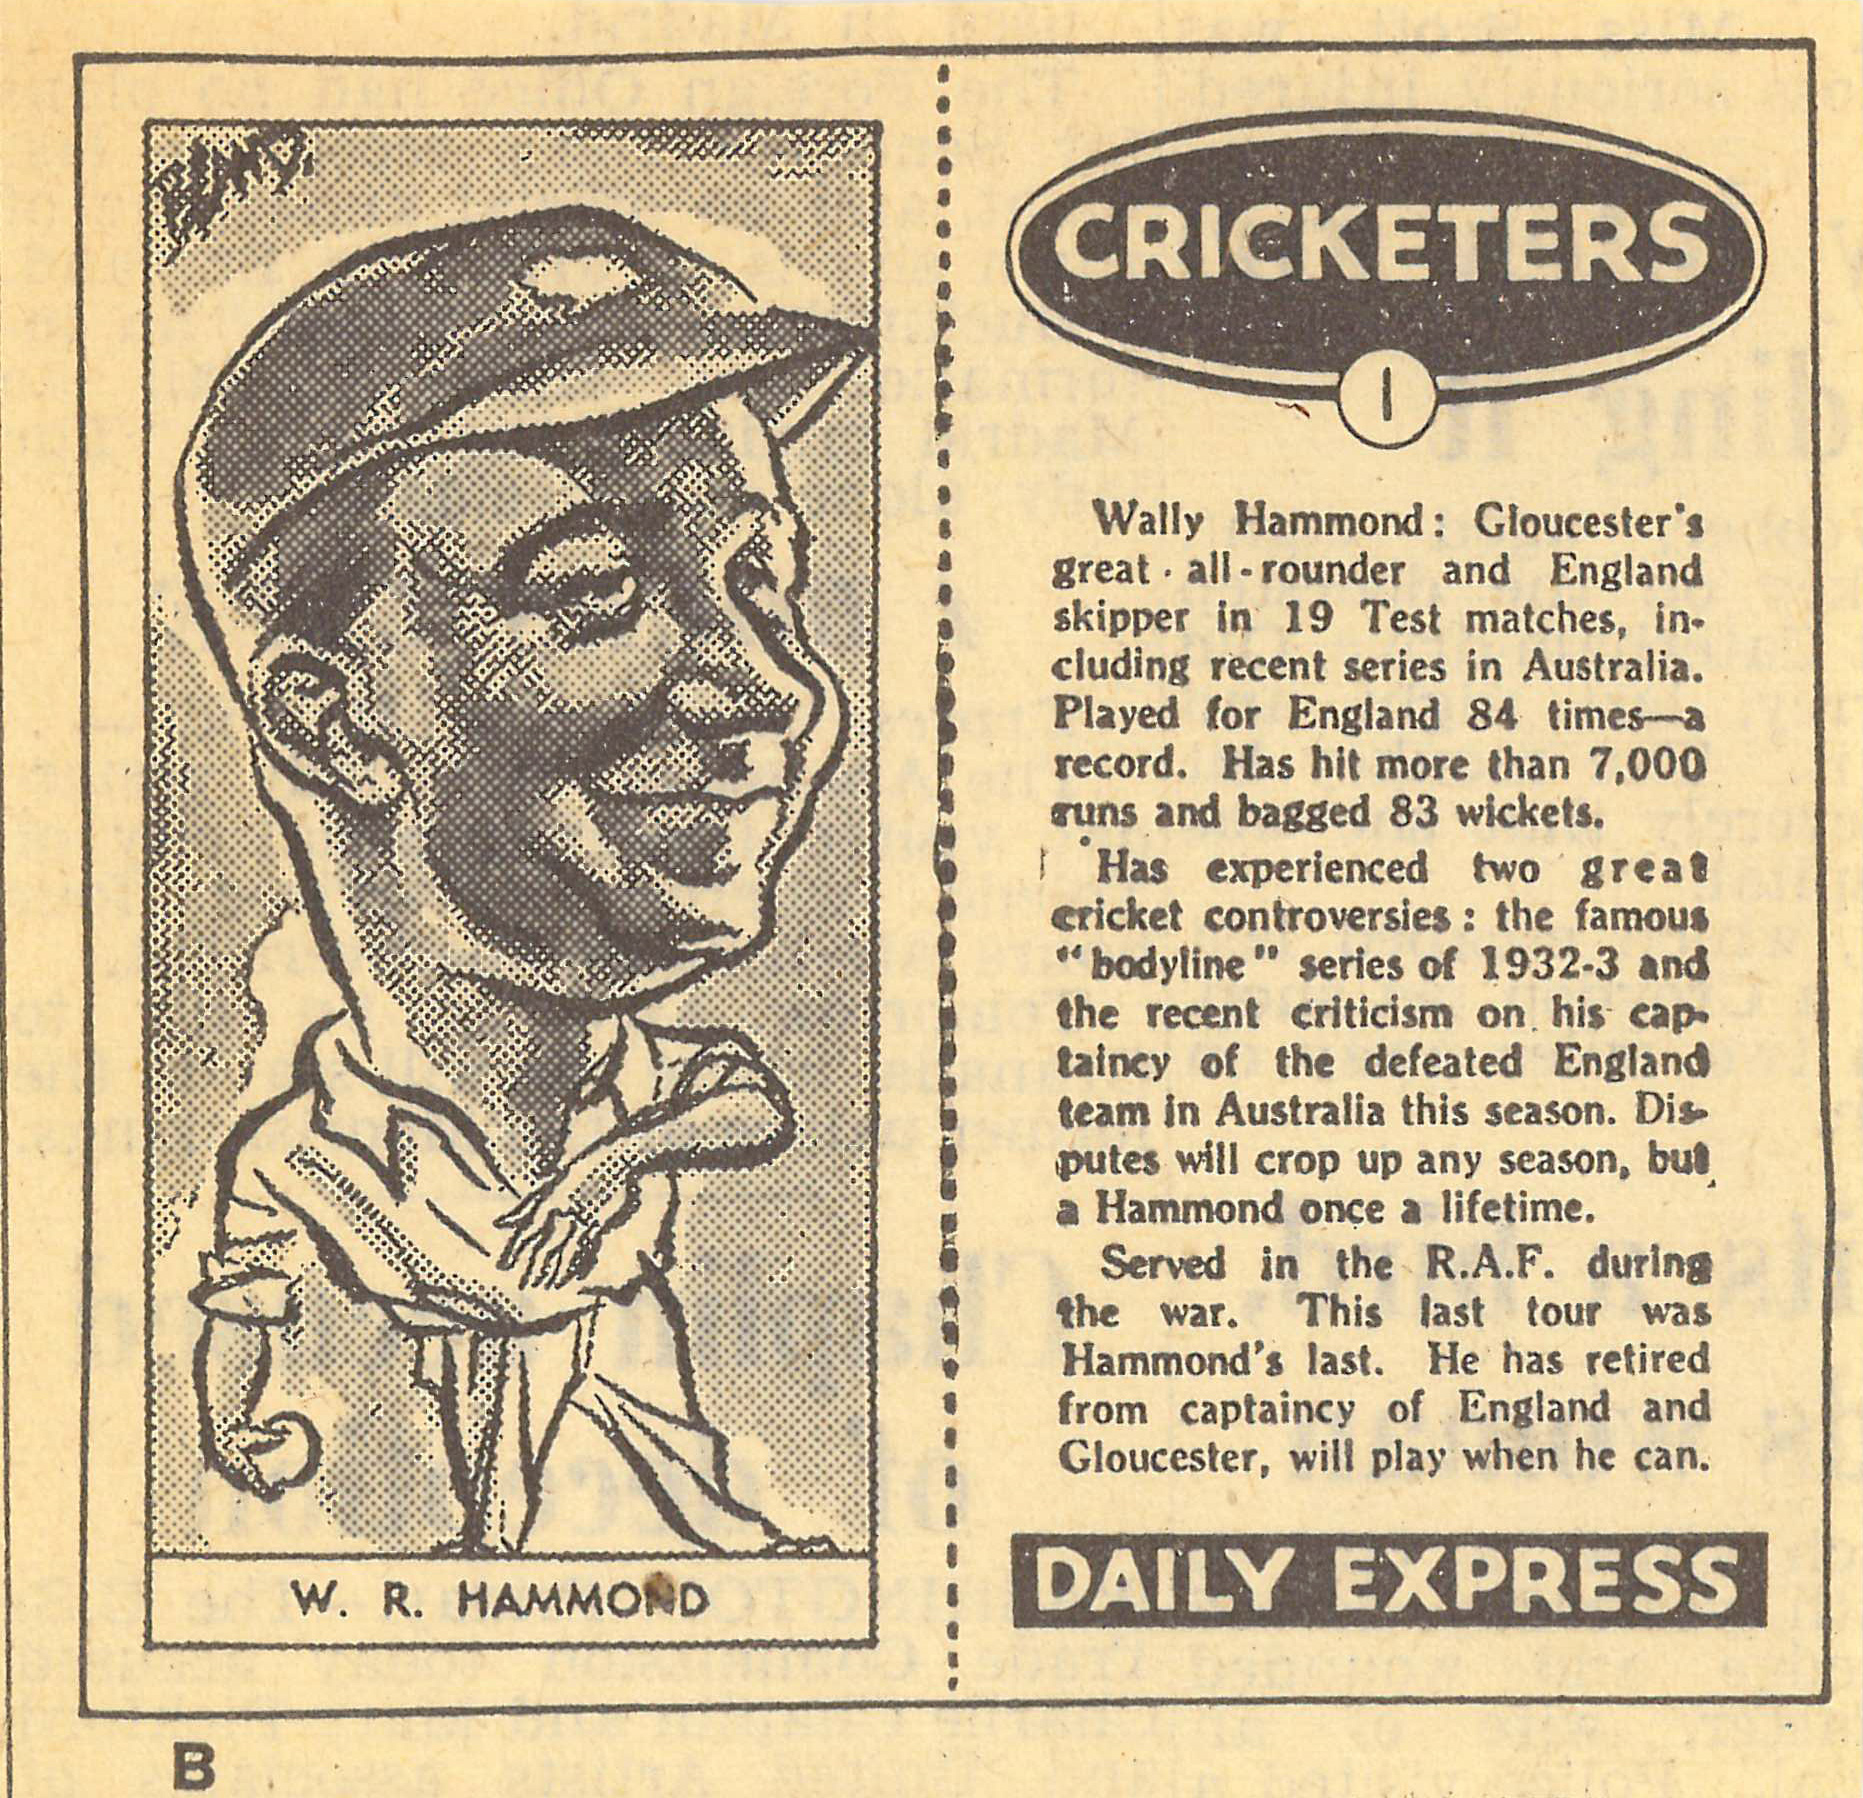 DAILY EXPRESS, Cricketers, inc. with text panels (8), Nos. 1-6, 8 & 10; images only (8), Nos. 1,